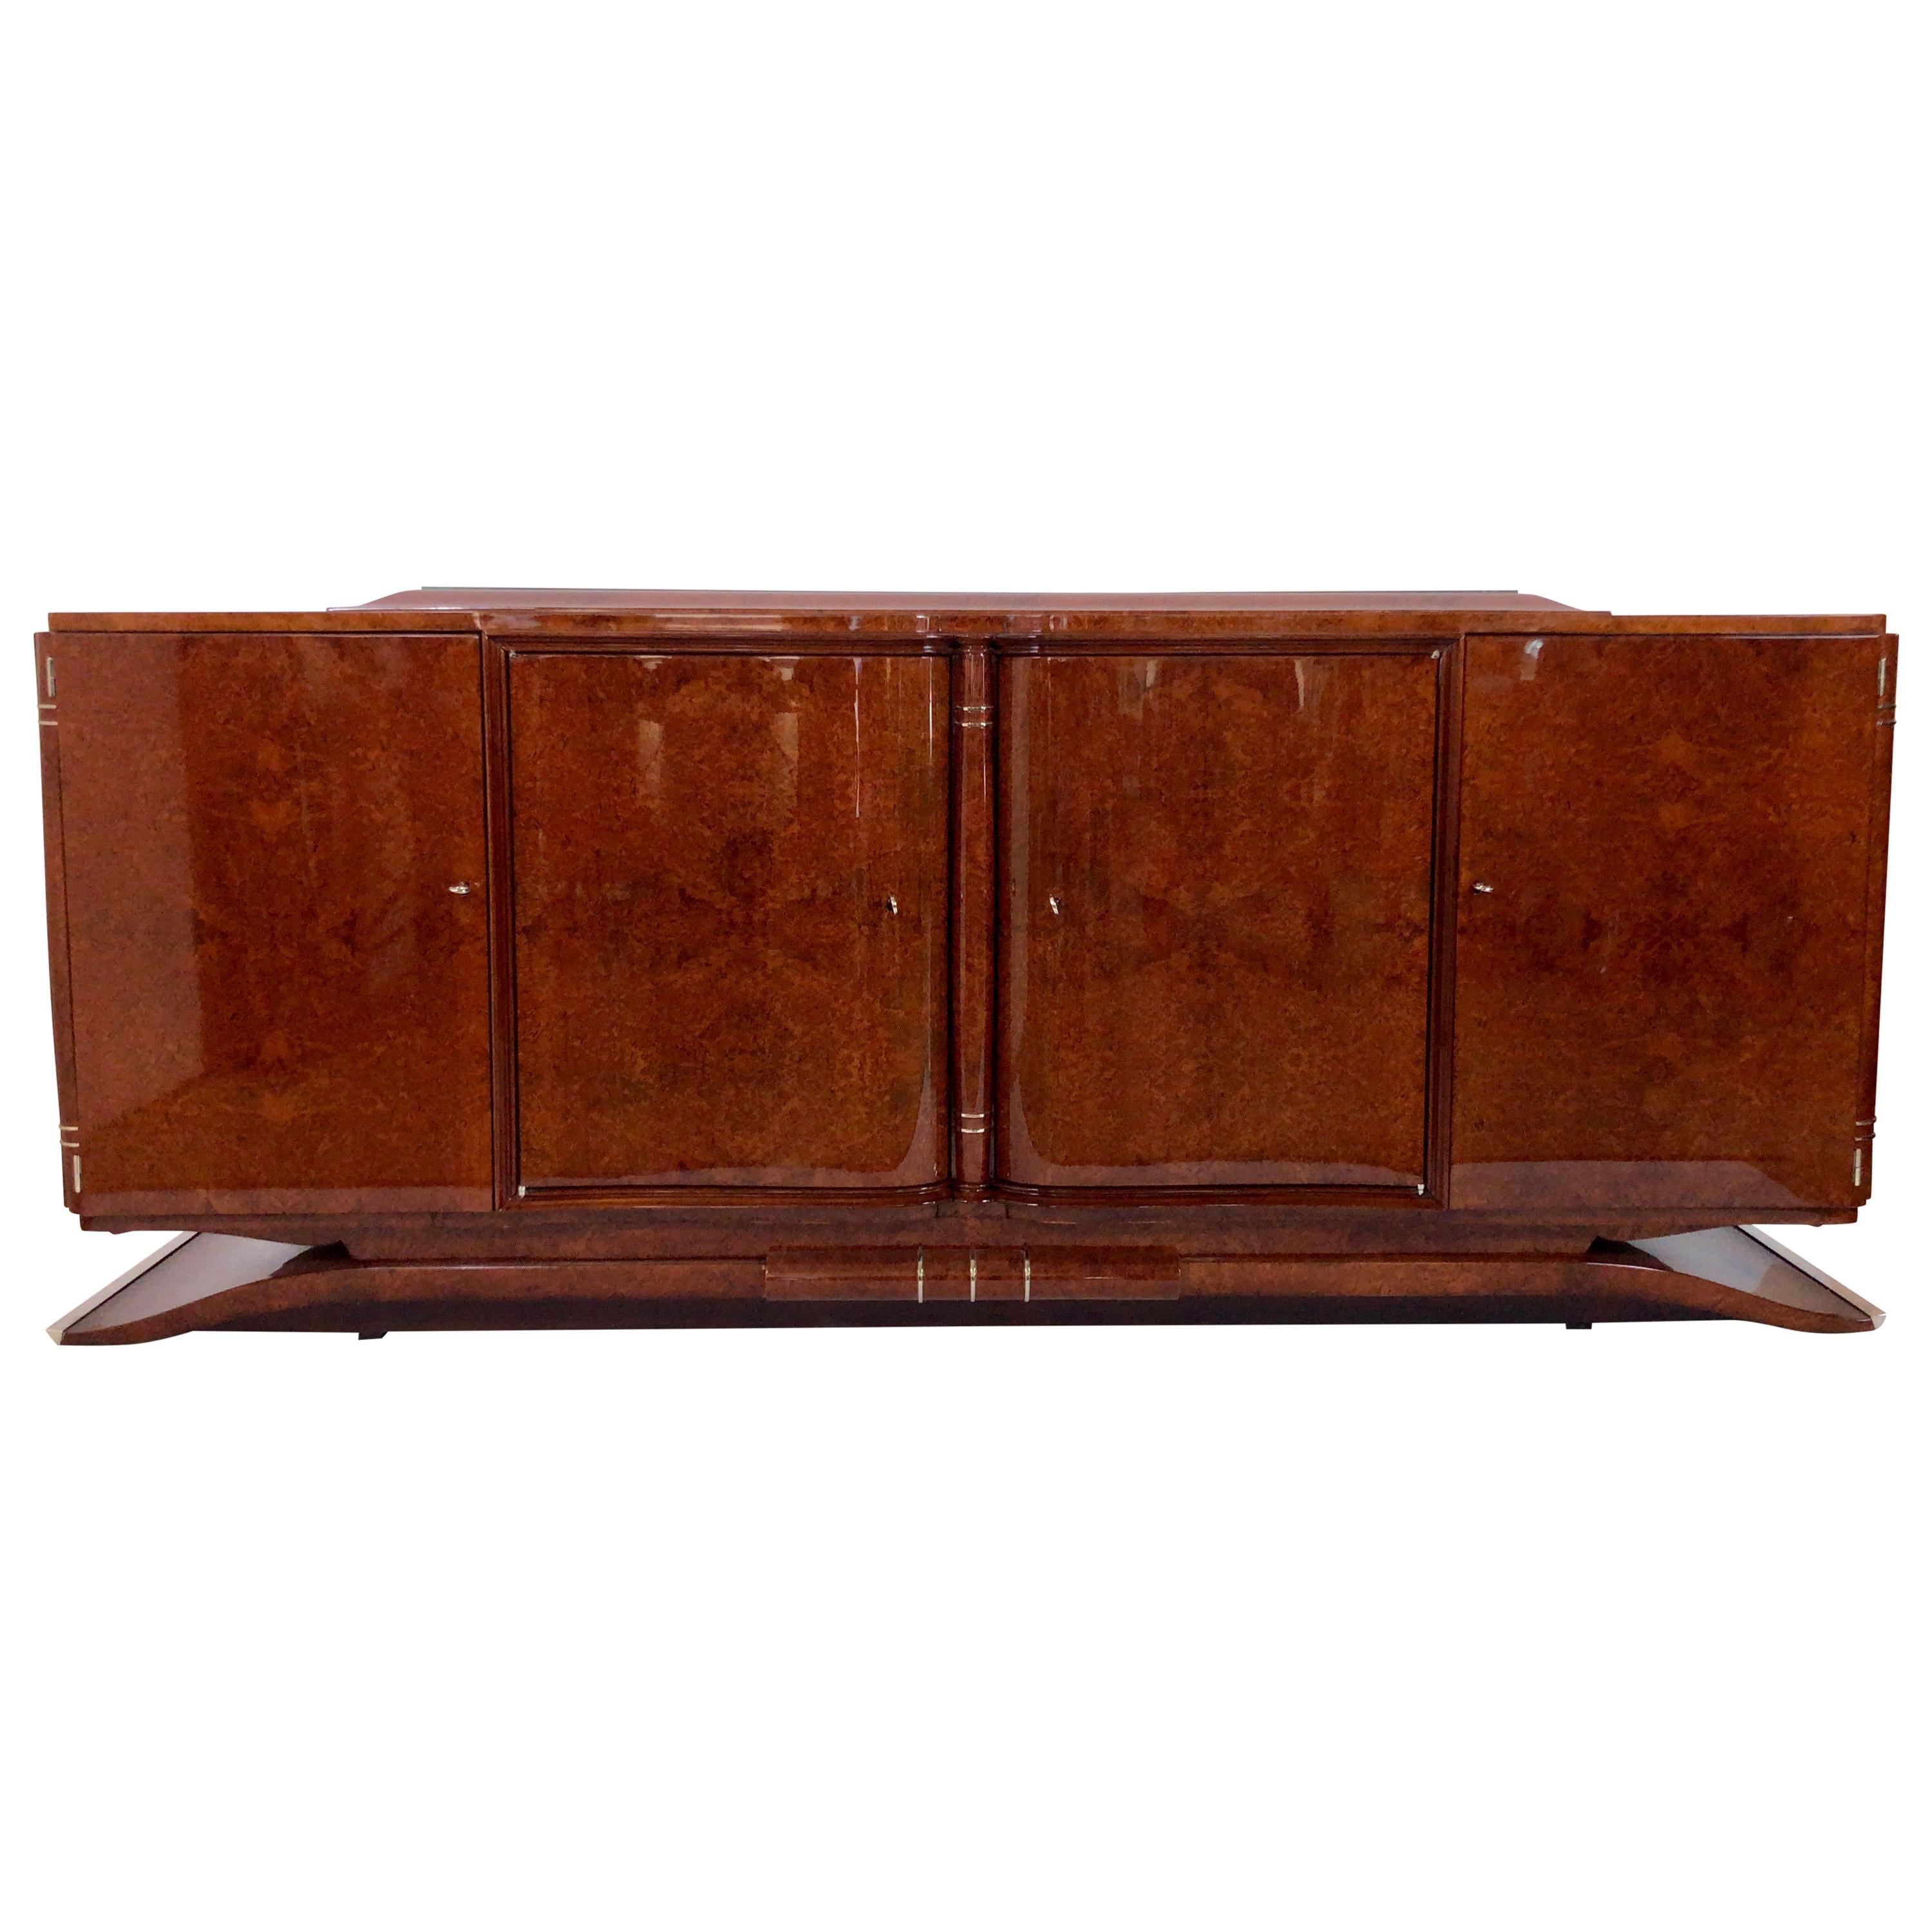 1930s French Art Deco Sideboard in Real Wood Veneer on a Moustache Foot For Sale